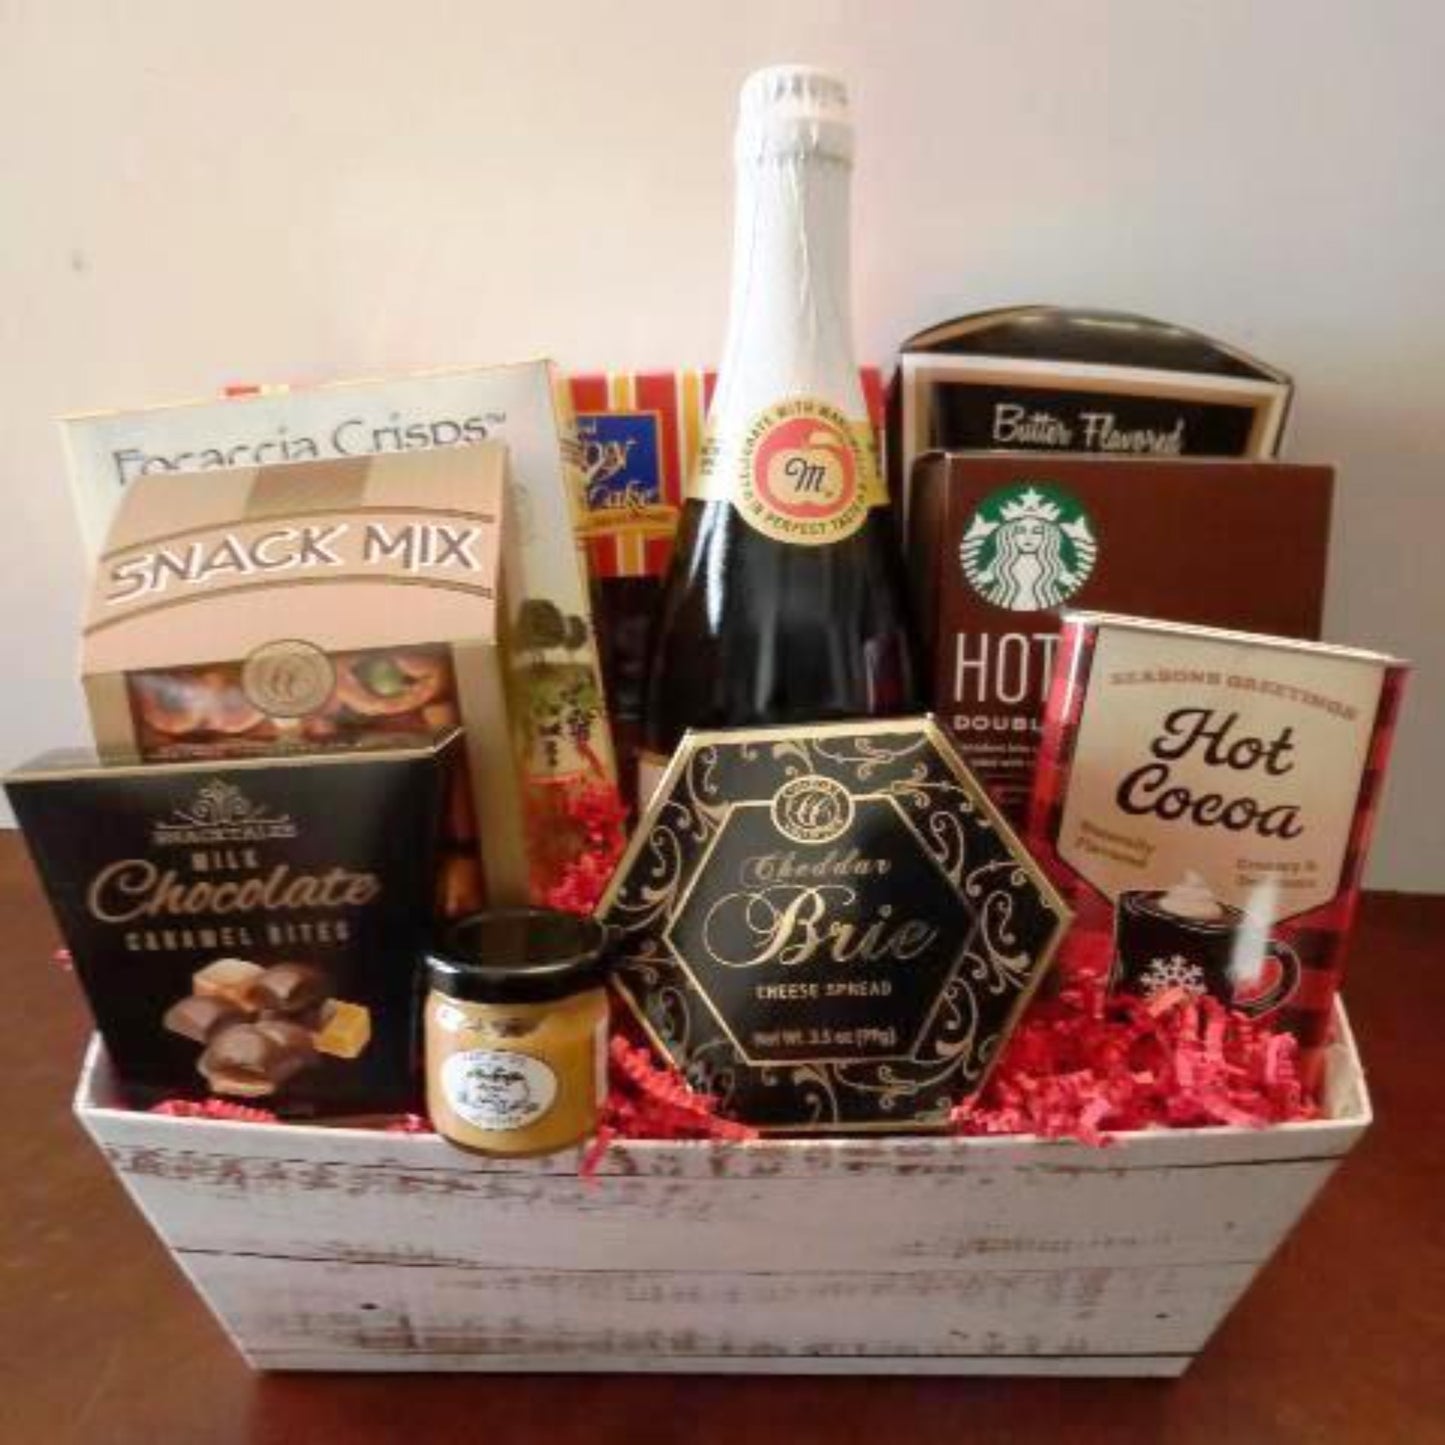  This gift basket is packed with Christmas hot cocoa mix, hot chocolate mix, box of snack mix, and cheese